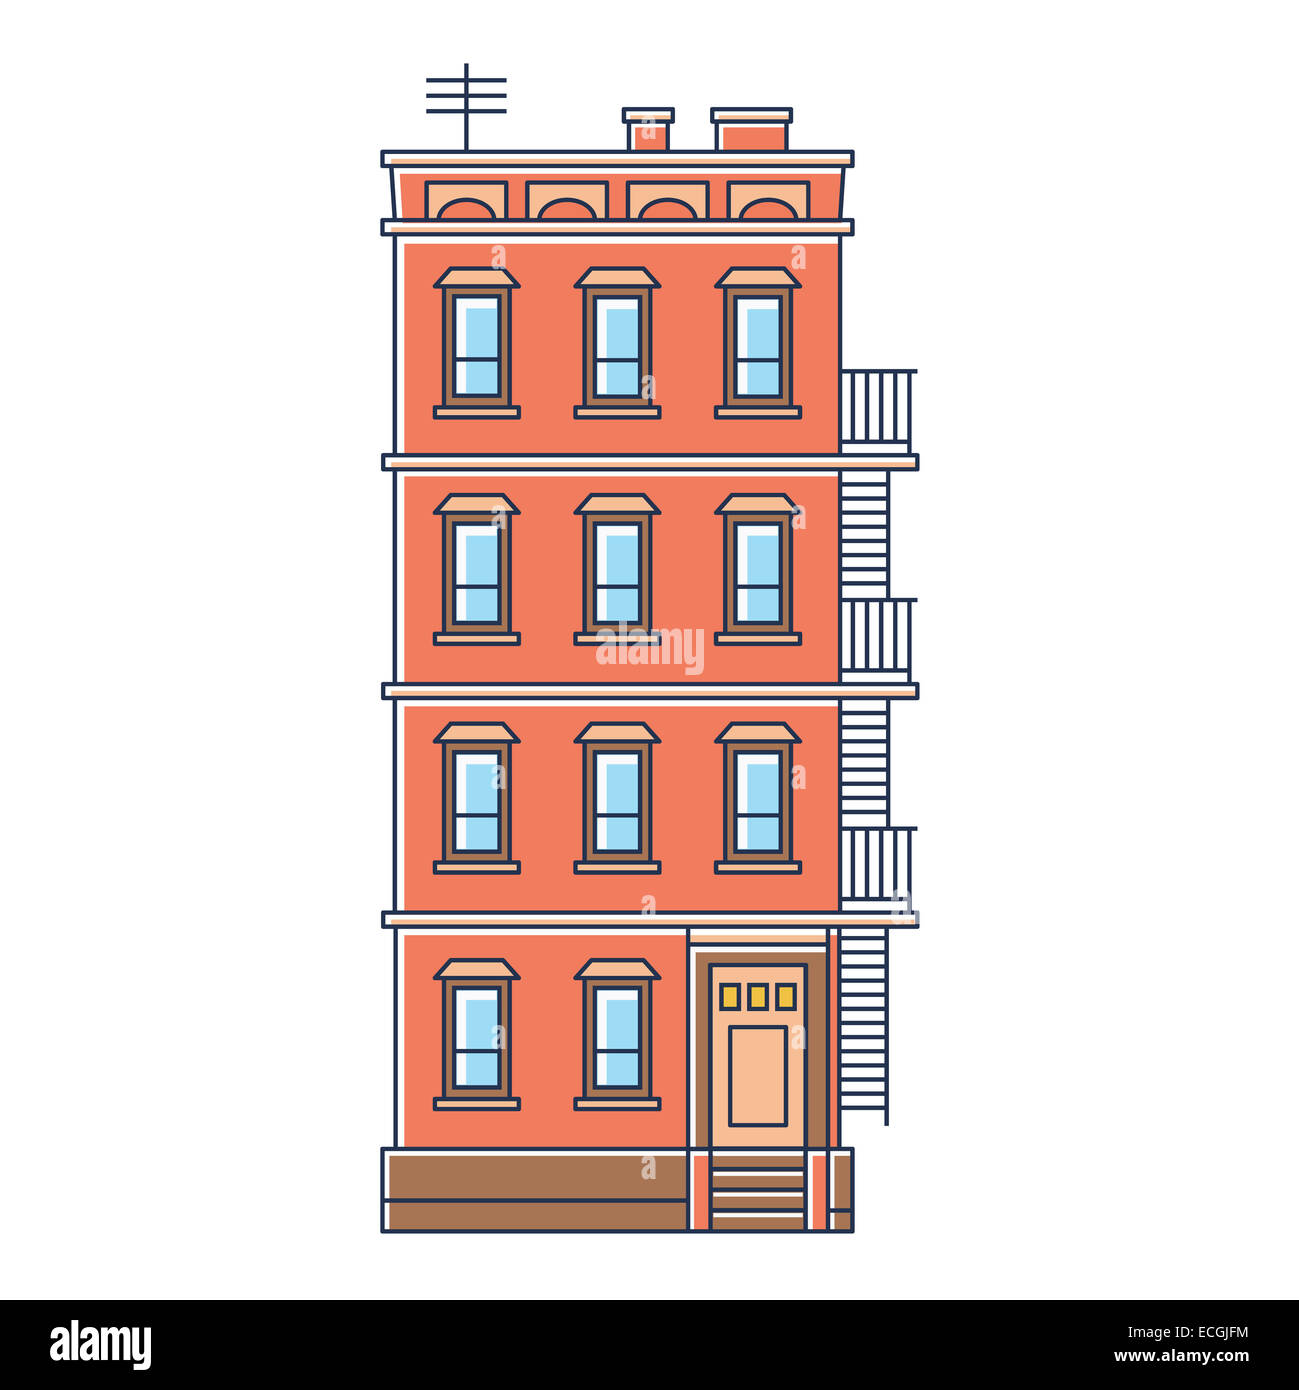 vector illustration - new york united states red brick old building with stairs isolated vintage Stock Photo